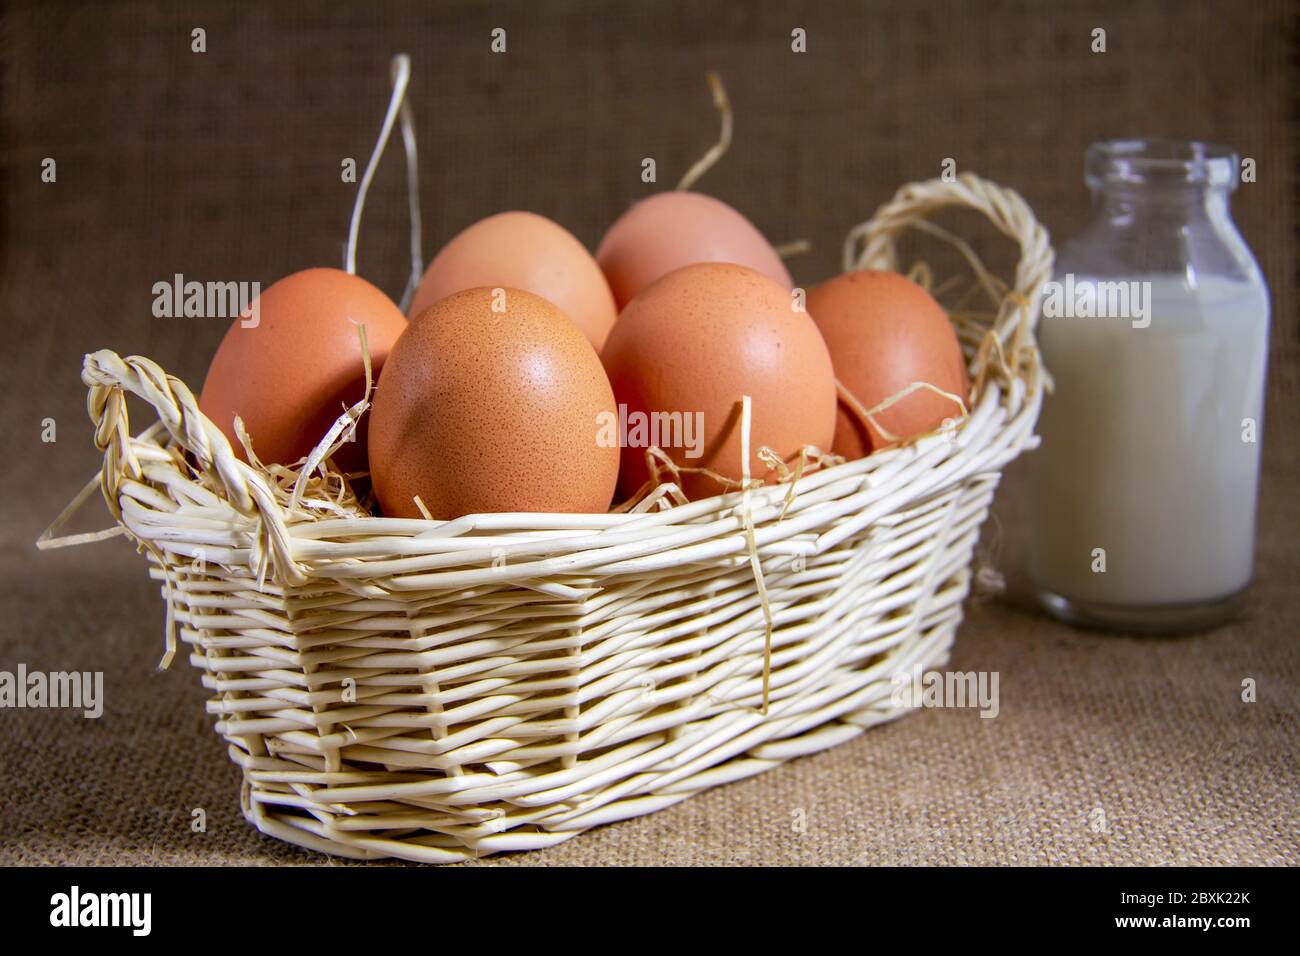 Six Eggs on some straw in a Wicker Basket, with a bottle of milk behind Stock Photo